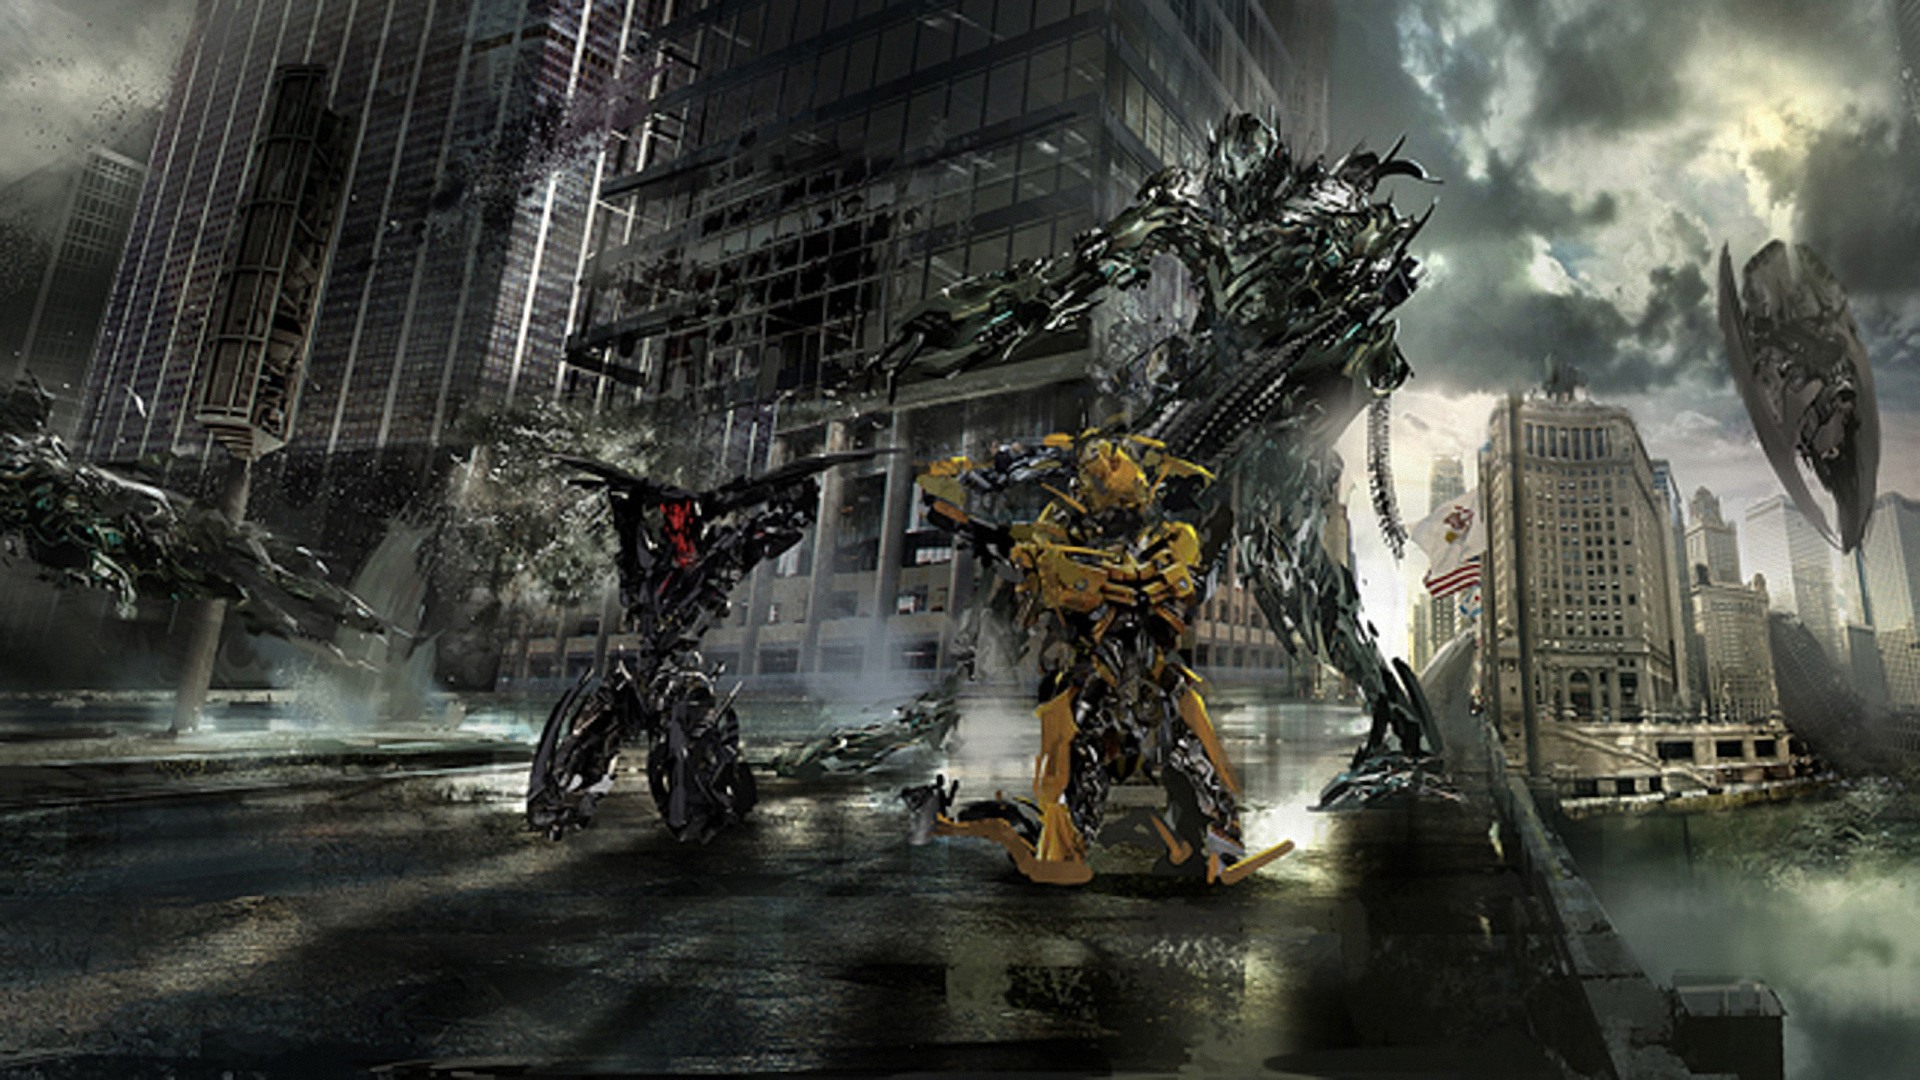 Transformers Hd Wallpapers 1080p Download - Transformers Wallpaper Hd 1080p , HD Wallpaper & Backgrounds